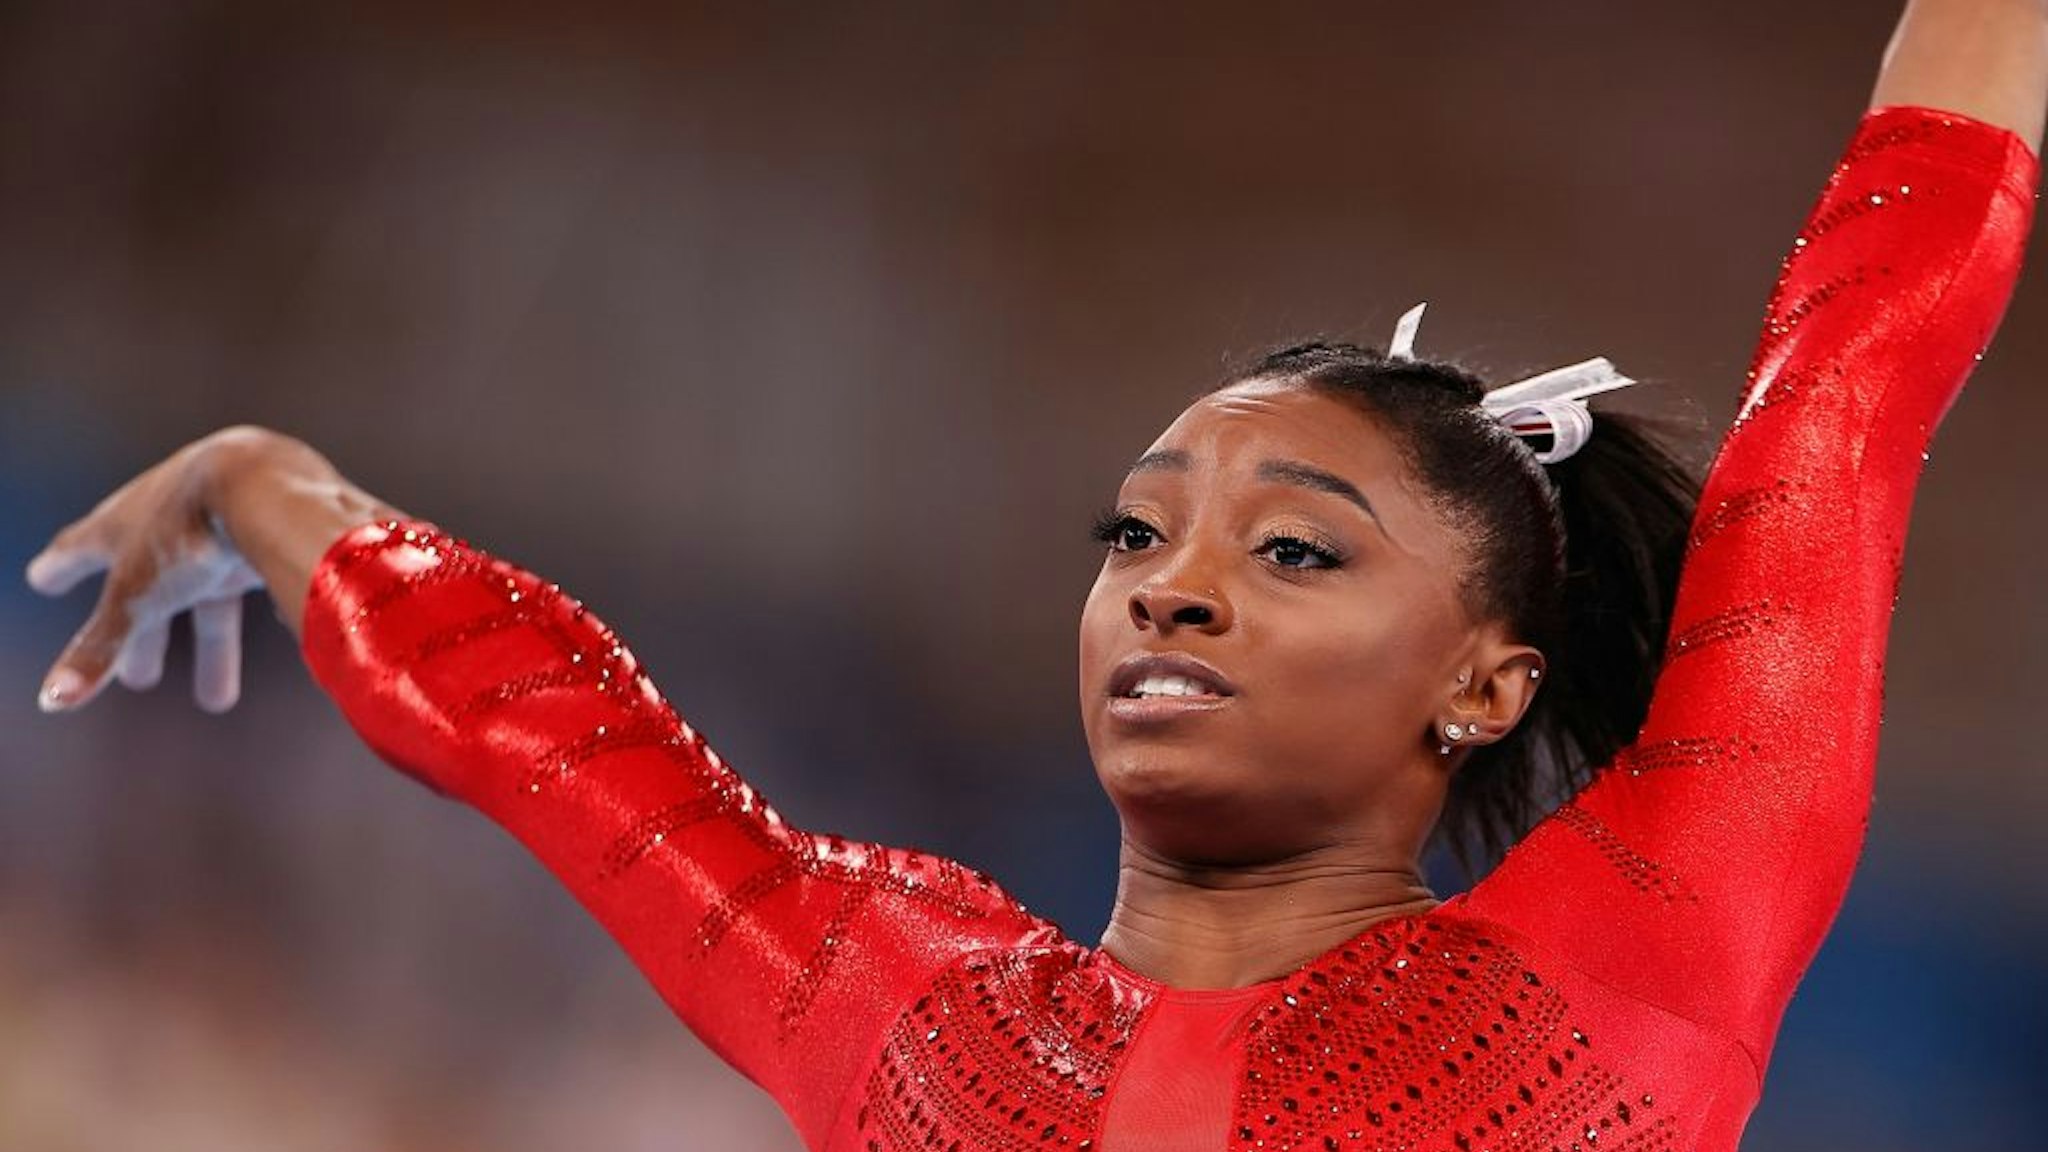 Simone Biles of the United States is seen after the vault of the artistic gymnastics women's team final at the Tokyo 2020 Olympic Games in Tokyo, Japan, July 27, 2021.